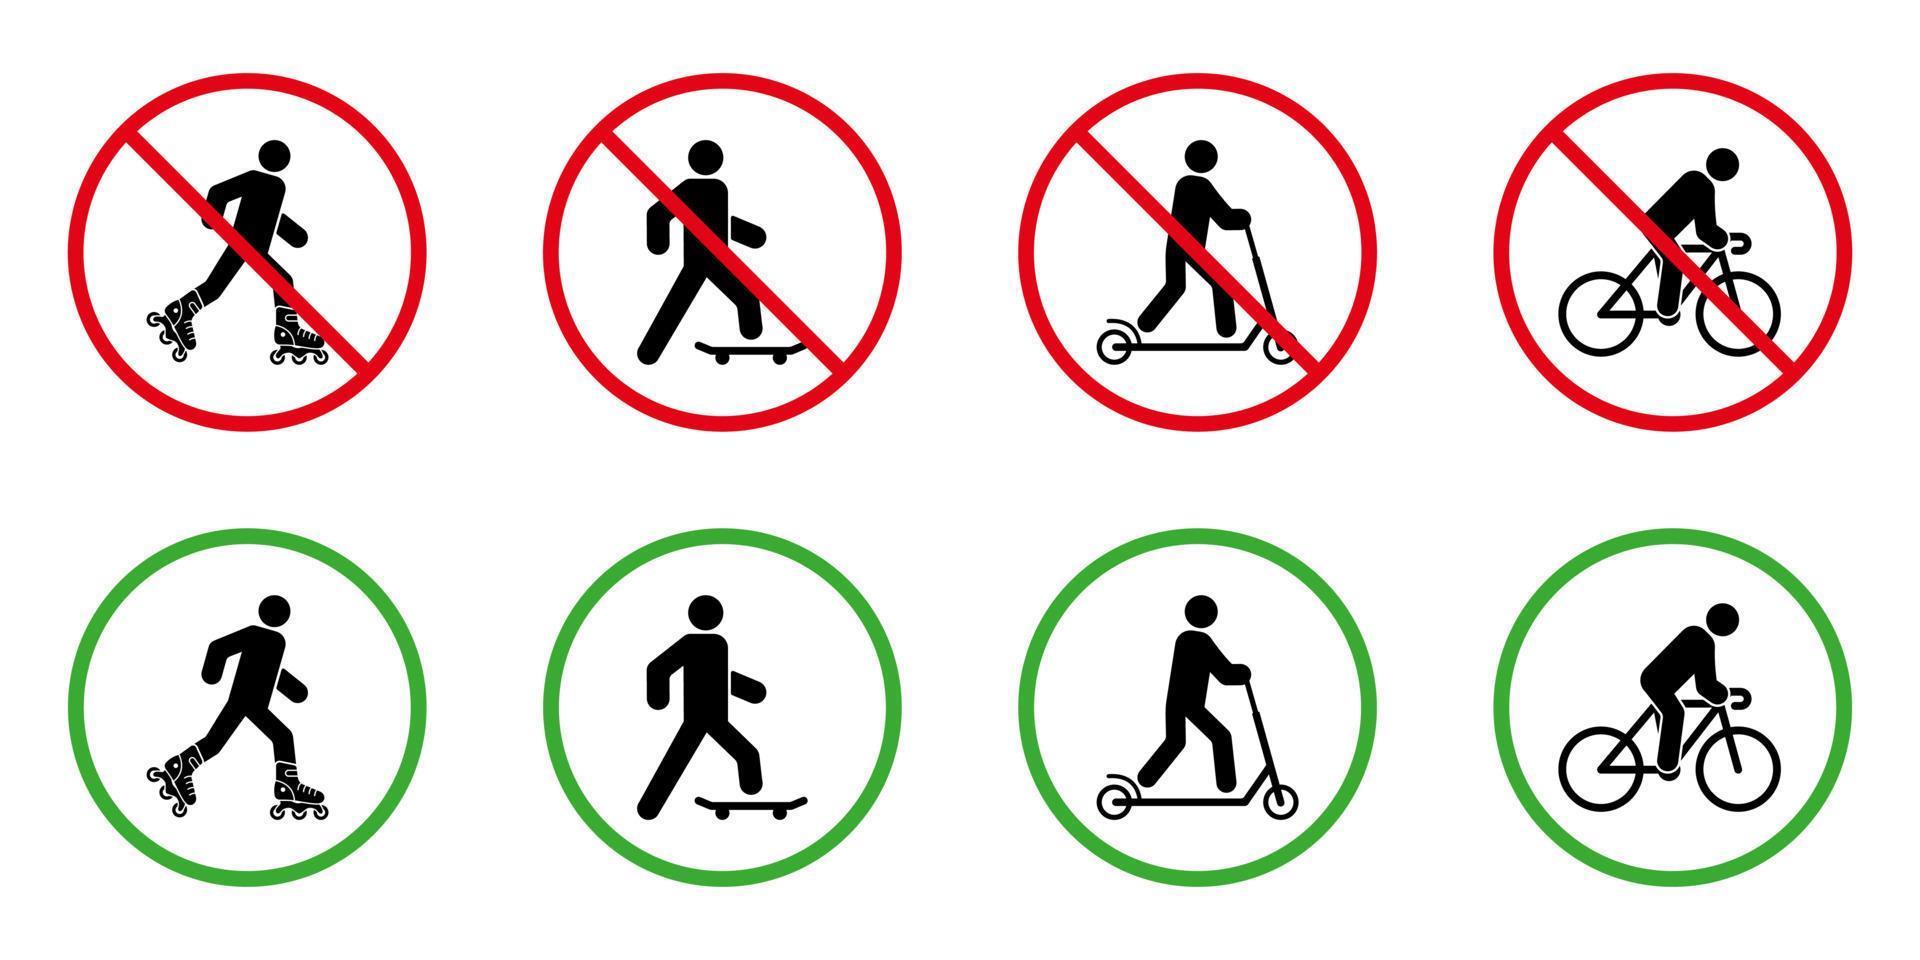 Caution Forbid Rollerskate Skateboard Bike Kick Scooter Pictogram Set. No Allow Wheel Eco Transport Sign. Permit Roller Skate Board Bicycle Kick Scooter Green Icon. Isolated Vector Illustration.